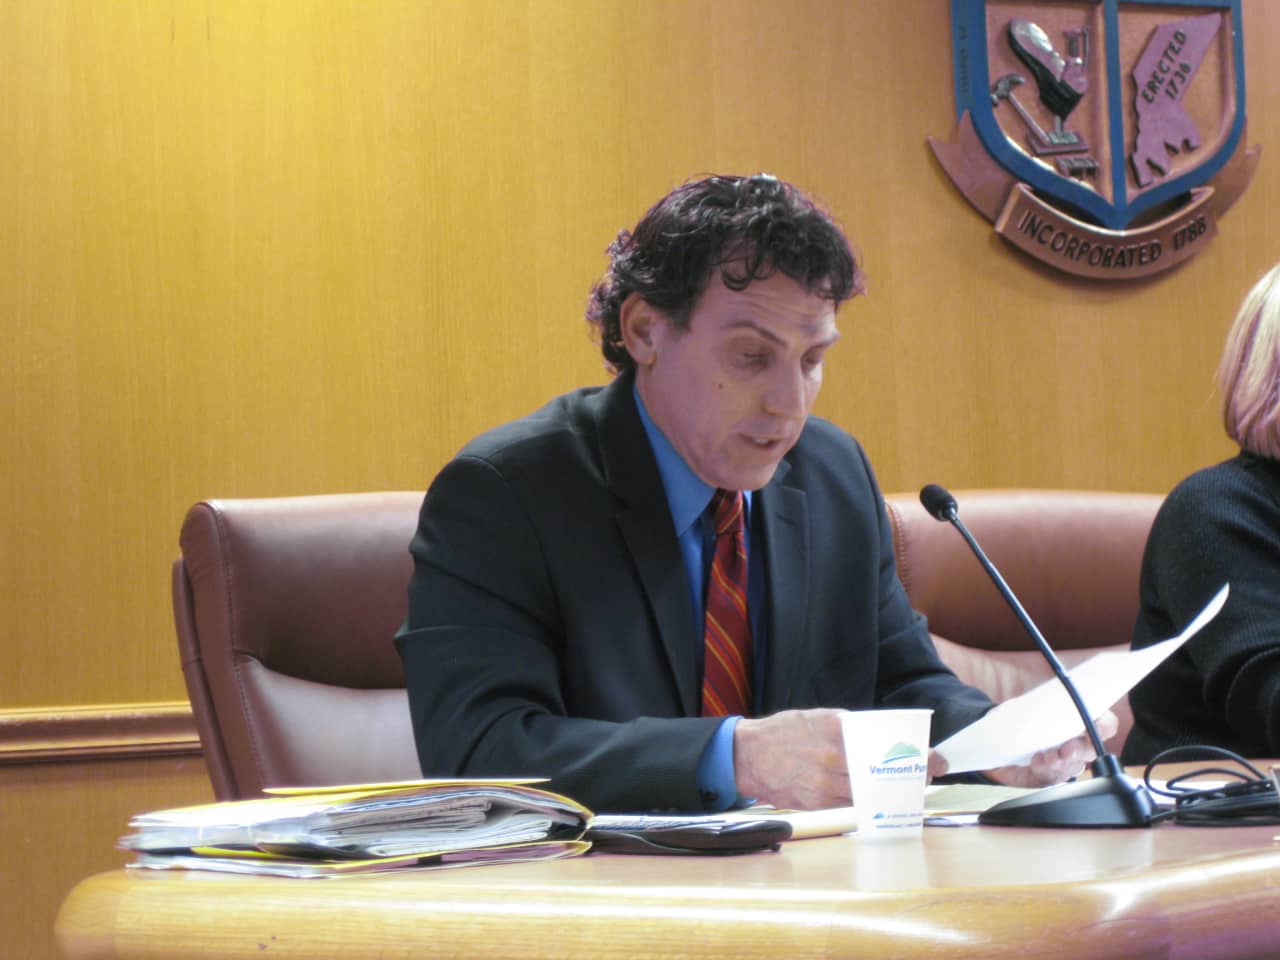 North Castle Supervisor Michael Schiliro is apparently angry with Michael Fareri, an Armonk developer.